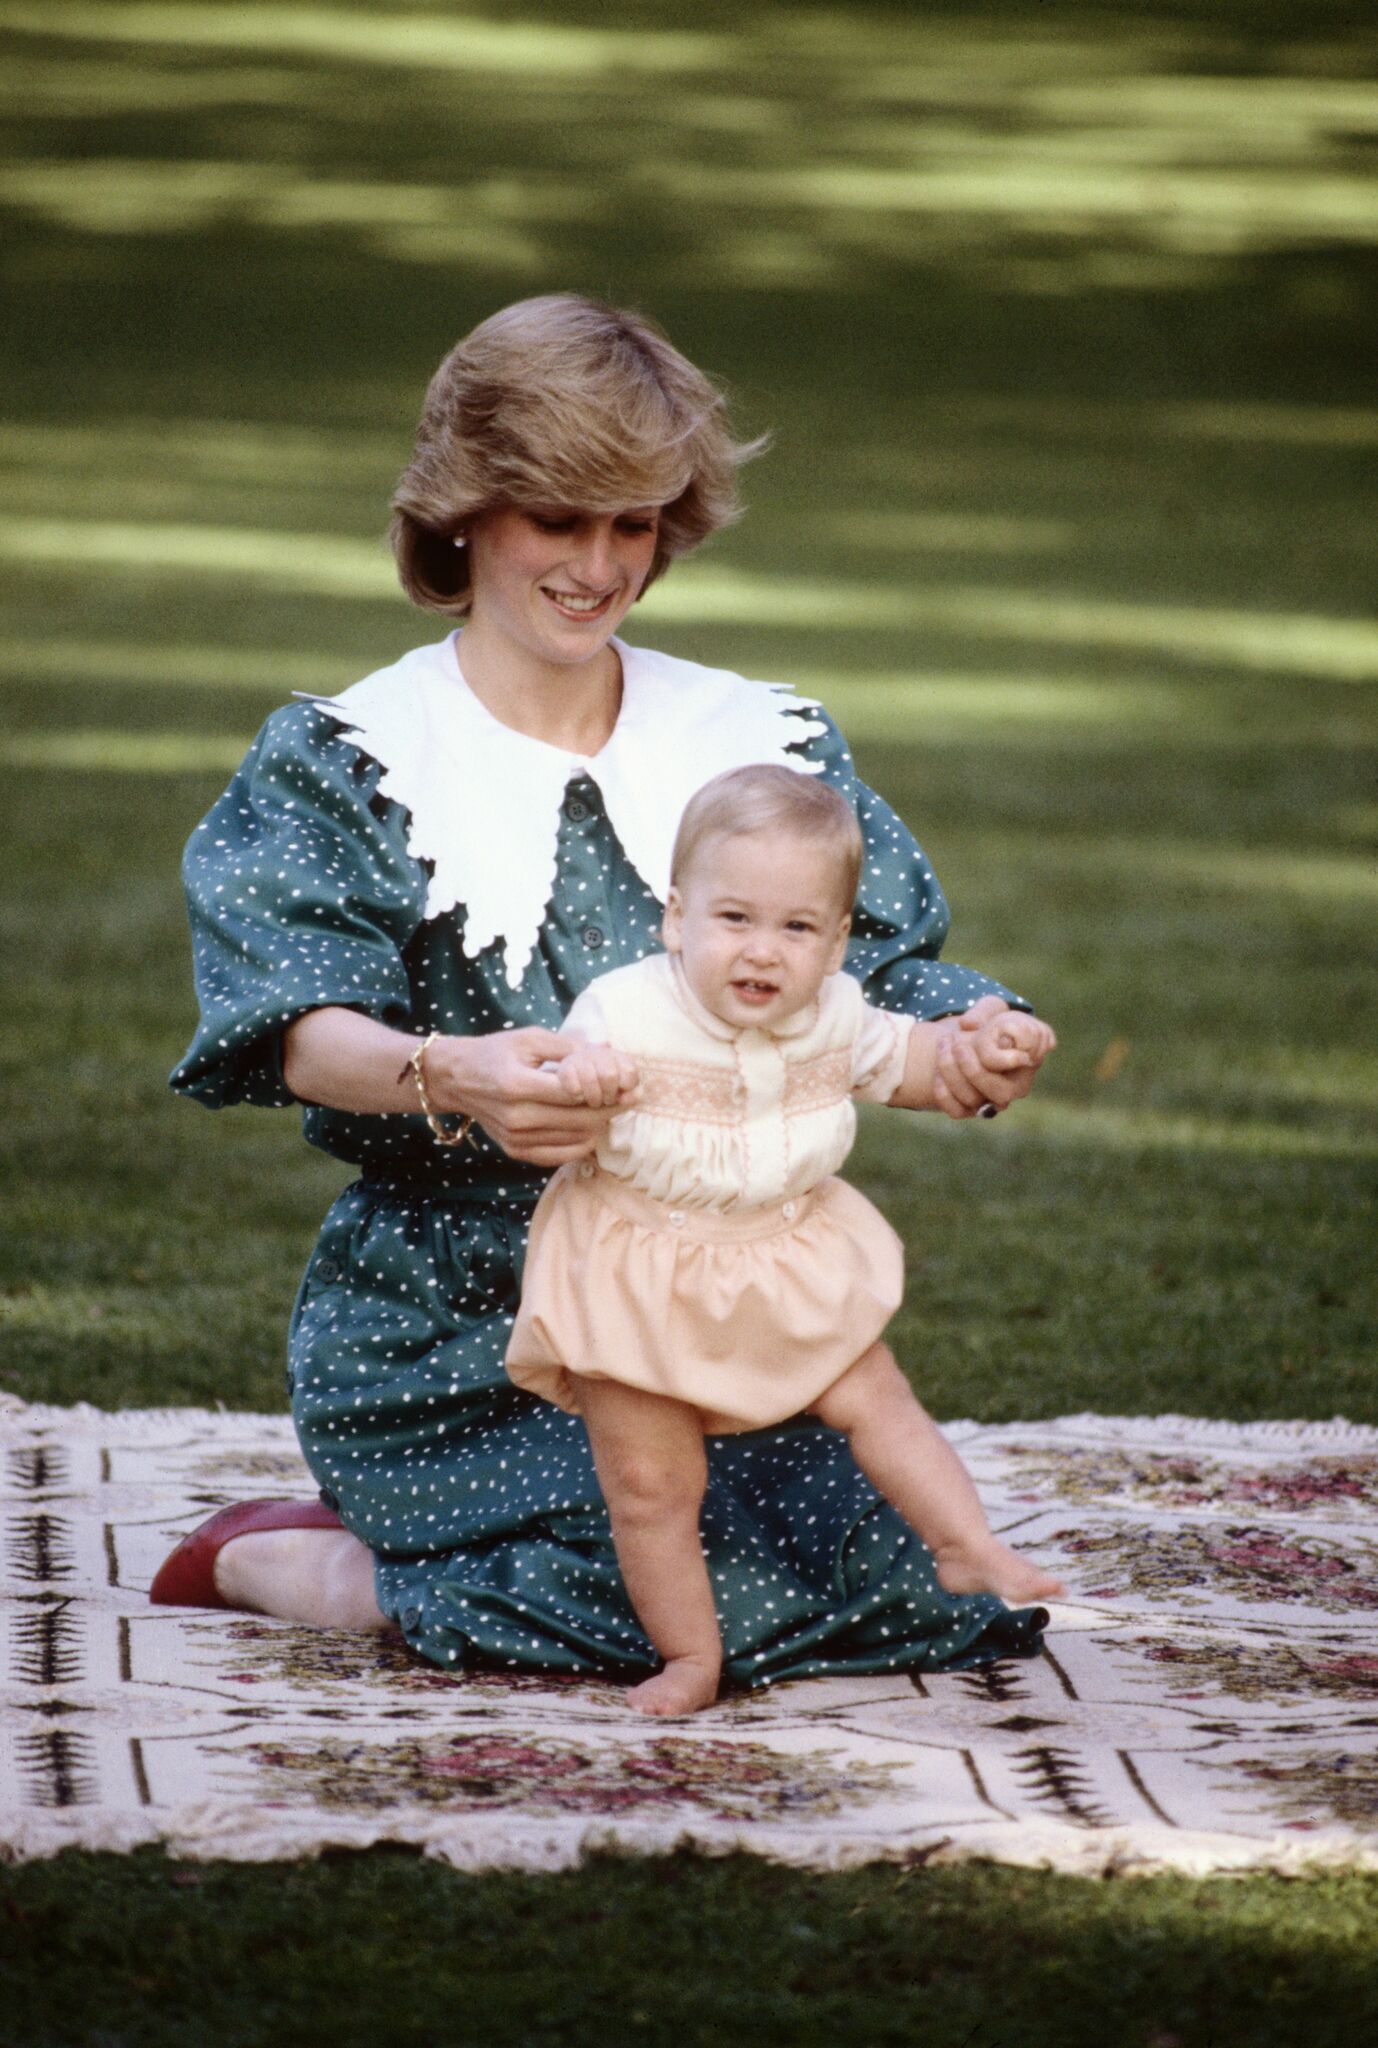  Diana Princess of Wales with Prince William at a photocall on the lawn of Government House on April 23, 1983 | Getty Images /  Global Images Ukraine